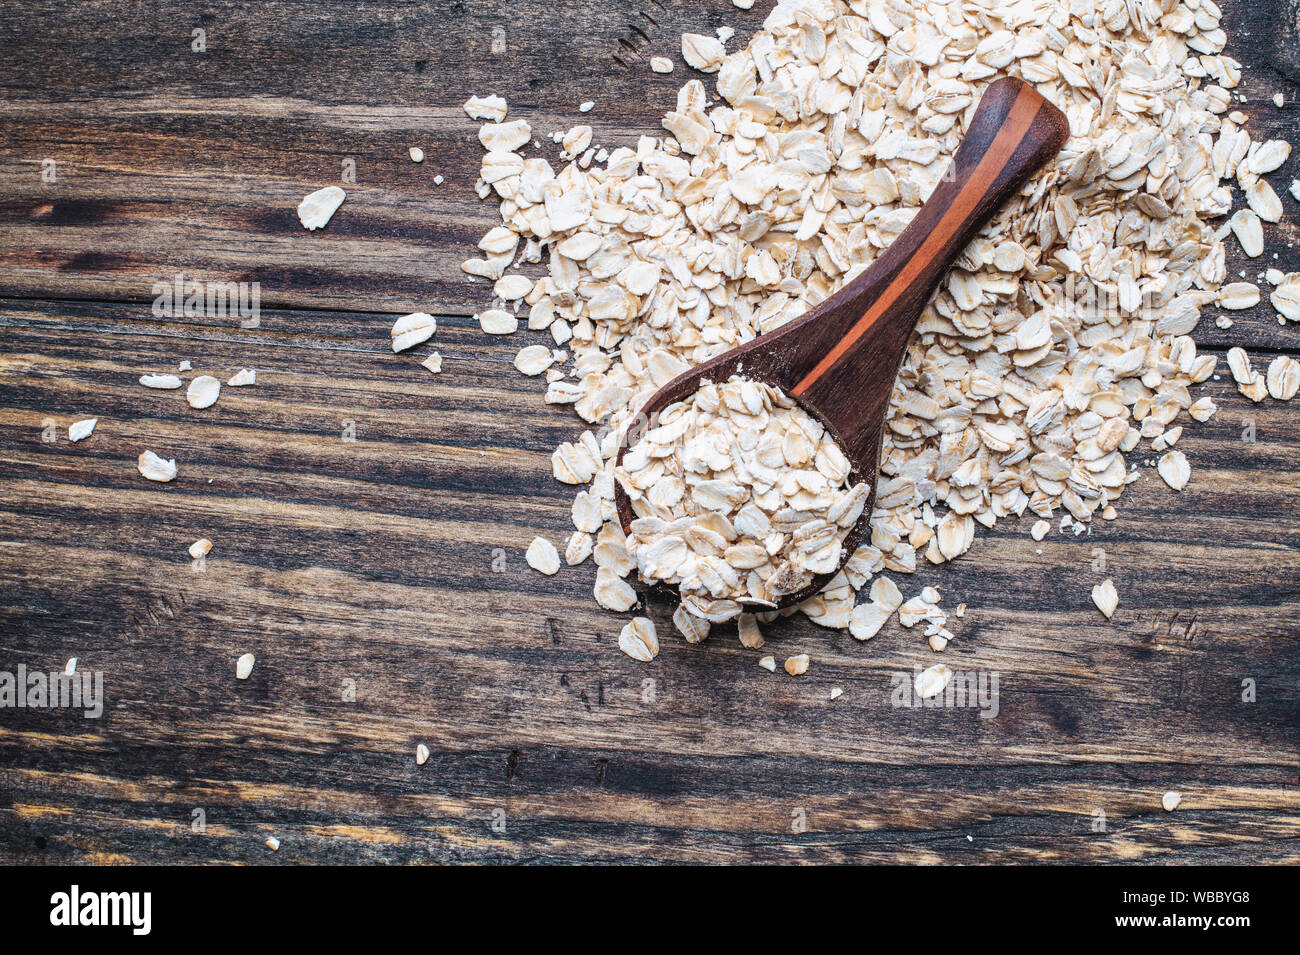 Healthy raw uncooked quick oat flakes in a wooden spoon over a wood table background. Shot from top view. Stock Photo